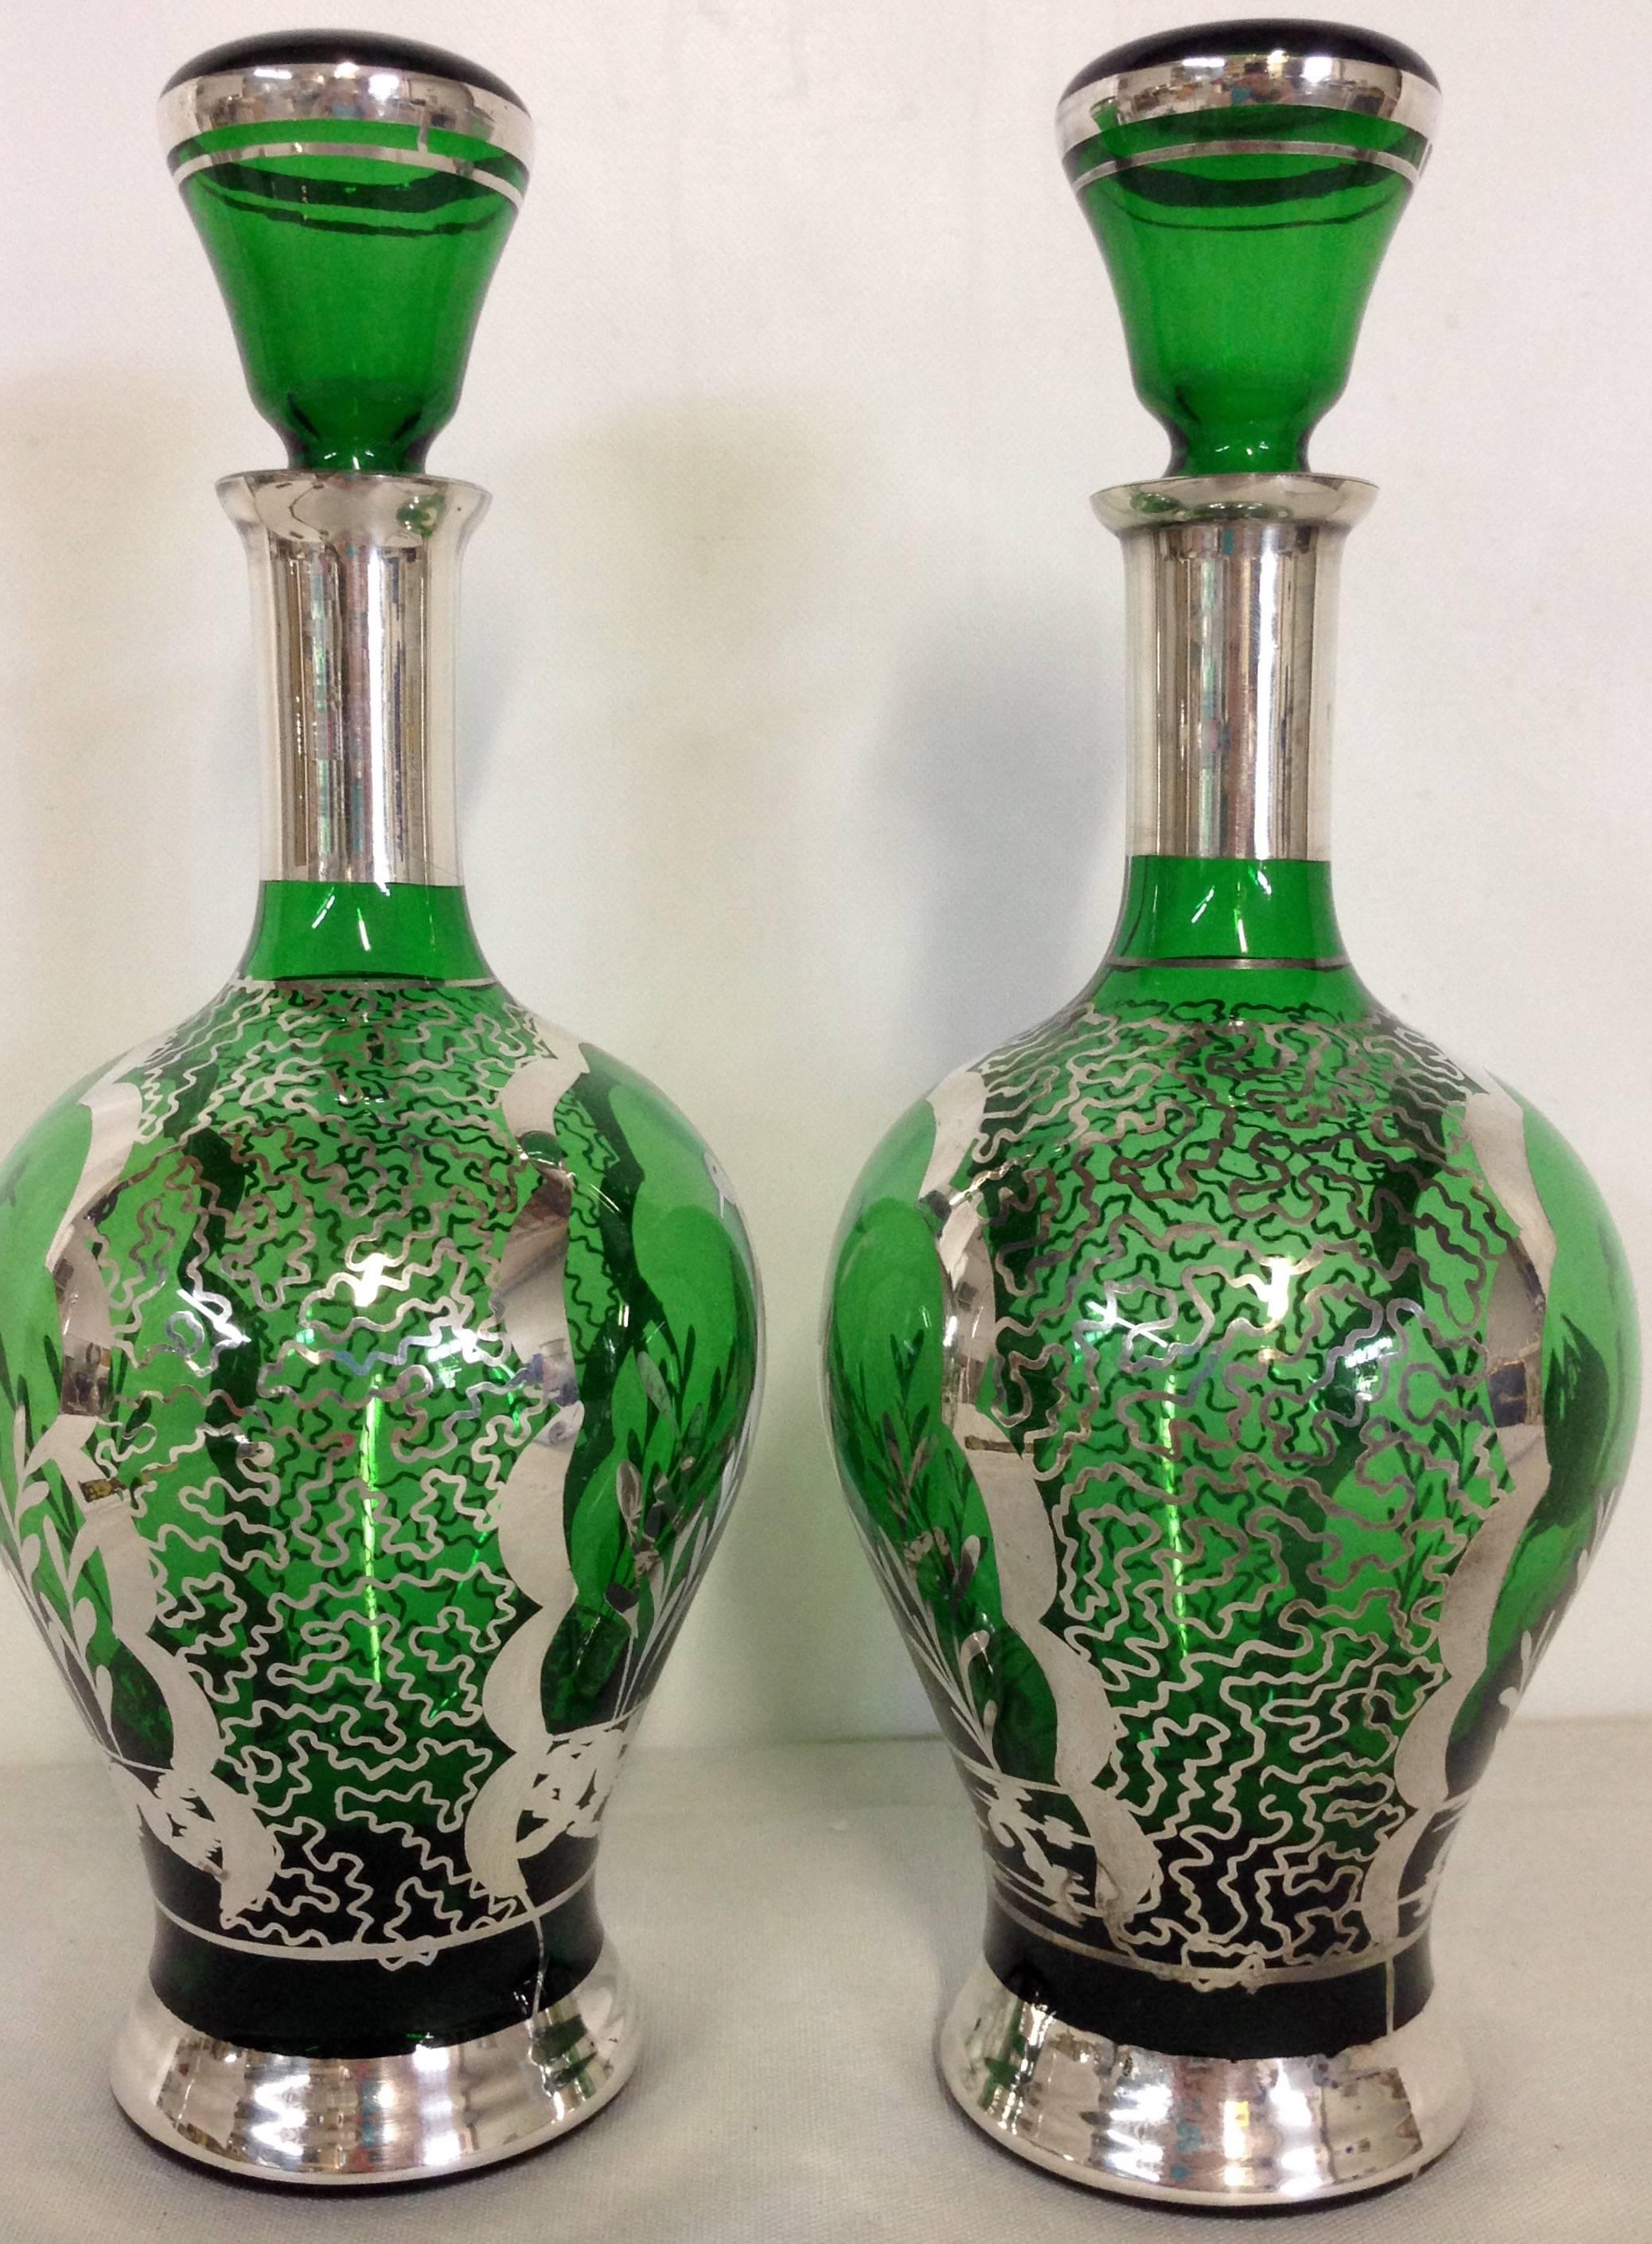 20th Century Vintage Pair of Emerald and Silver-Overlay Art Glass Decanters